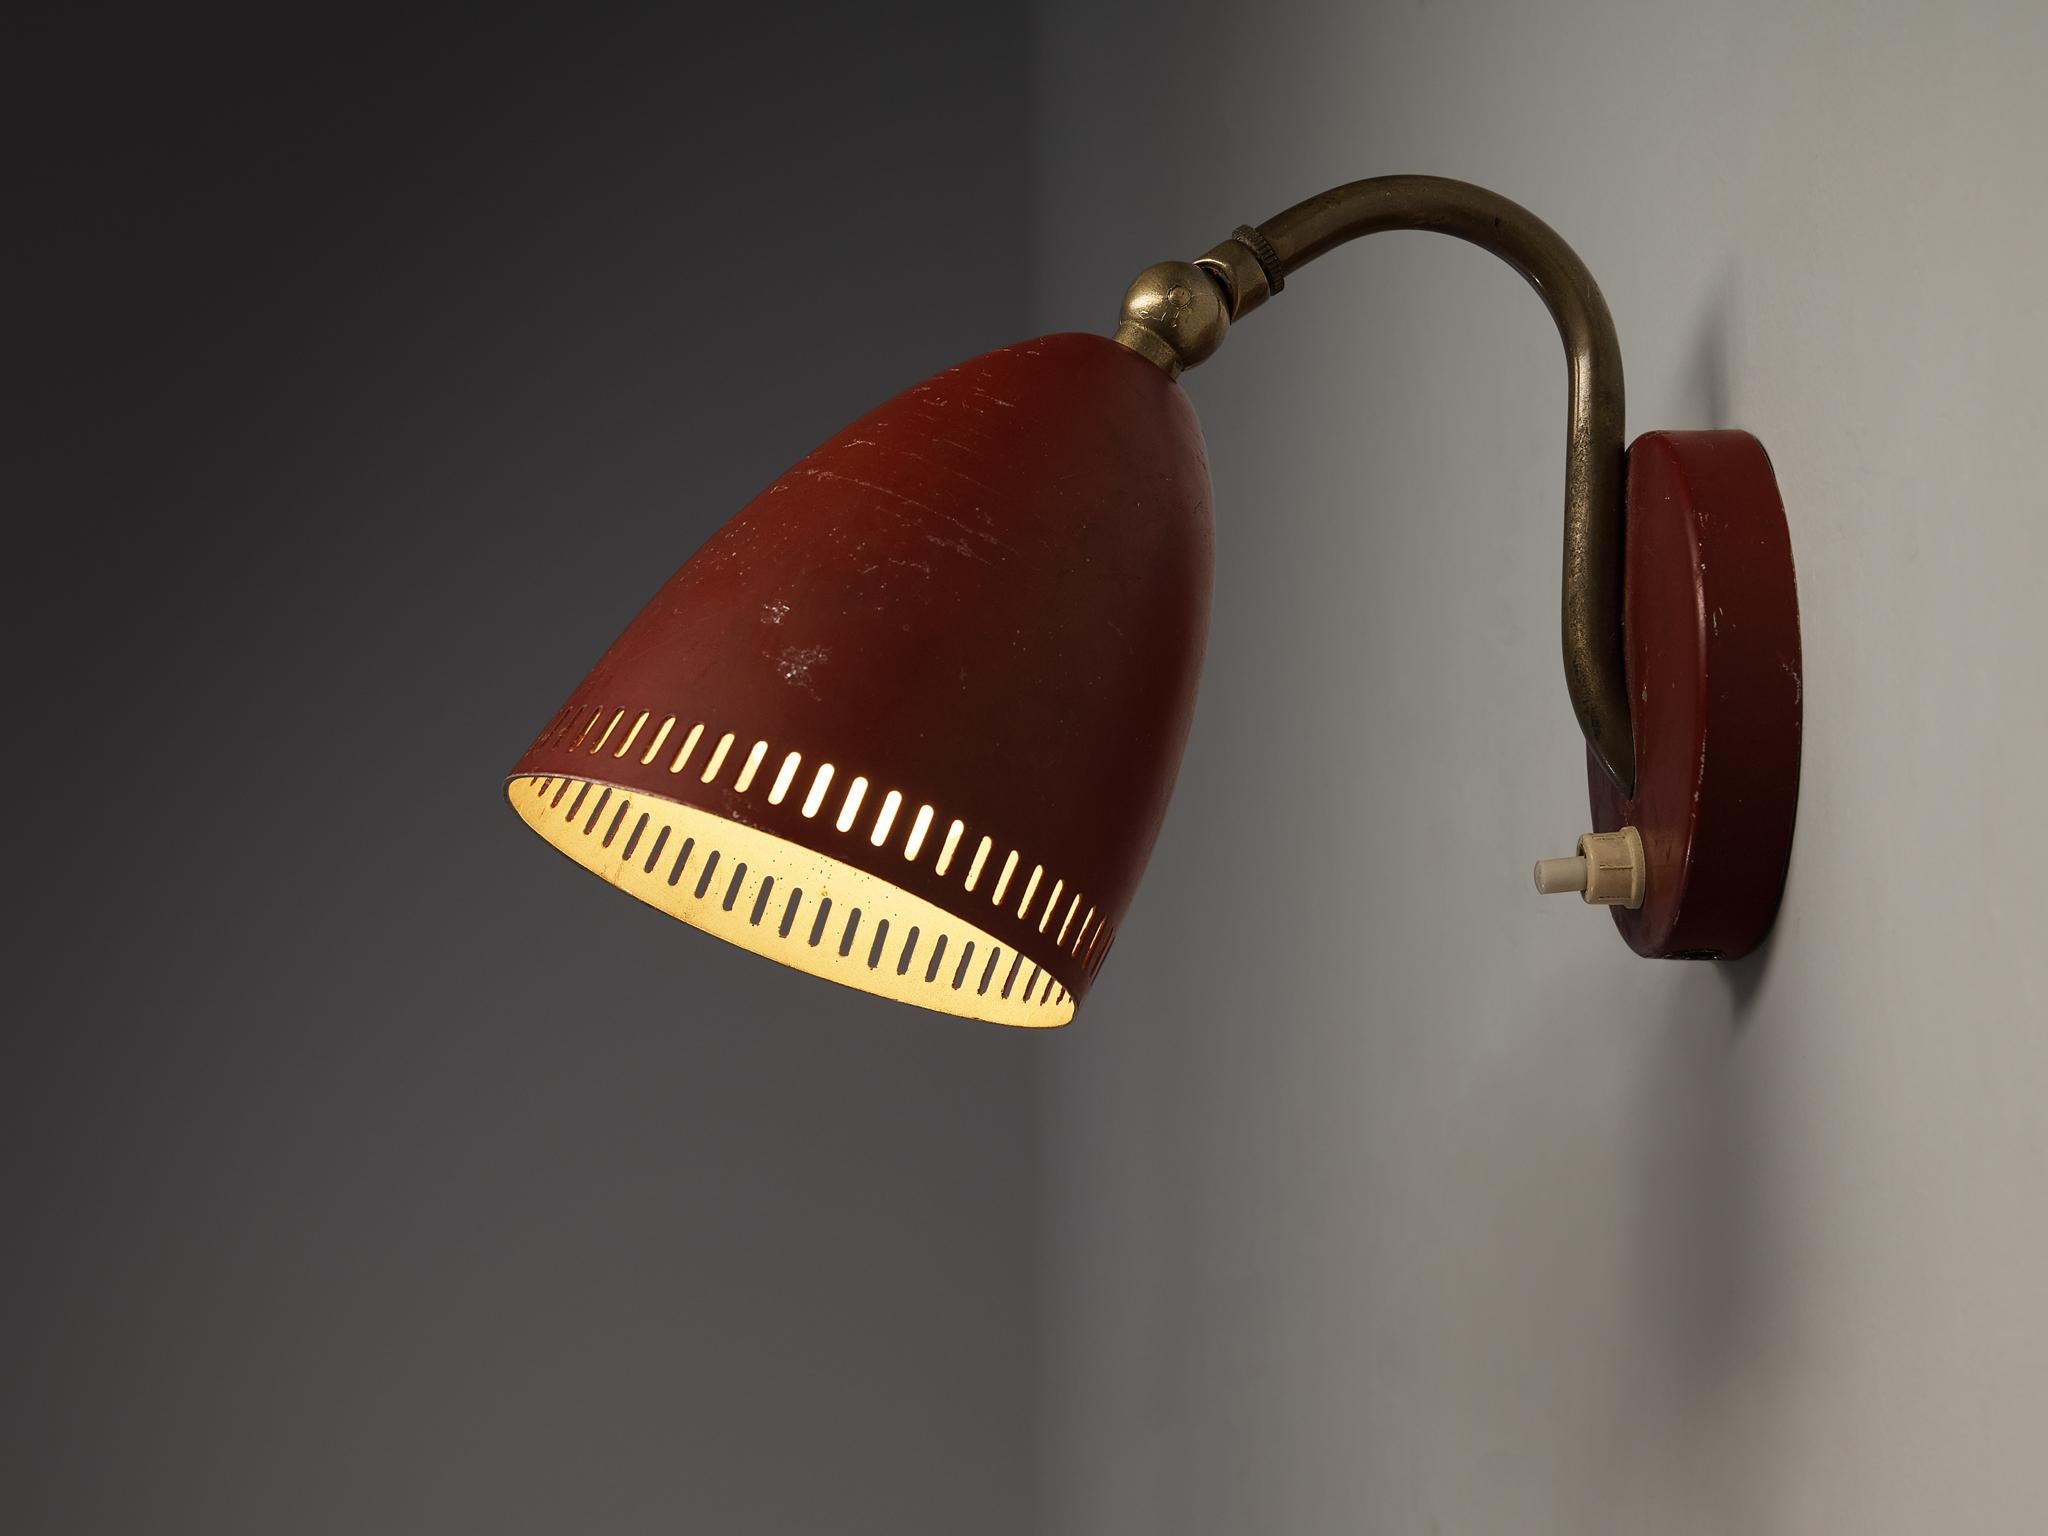 Wall light, metal, brass, Europe, 1950s

A wall light with red lacquered metal shade and base. The stem of this elegant light is executed in brass. A nice detail of this design are the small perforated rectangular cutouts near the outer rim of the